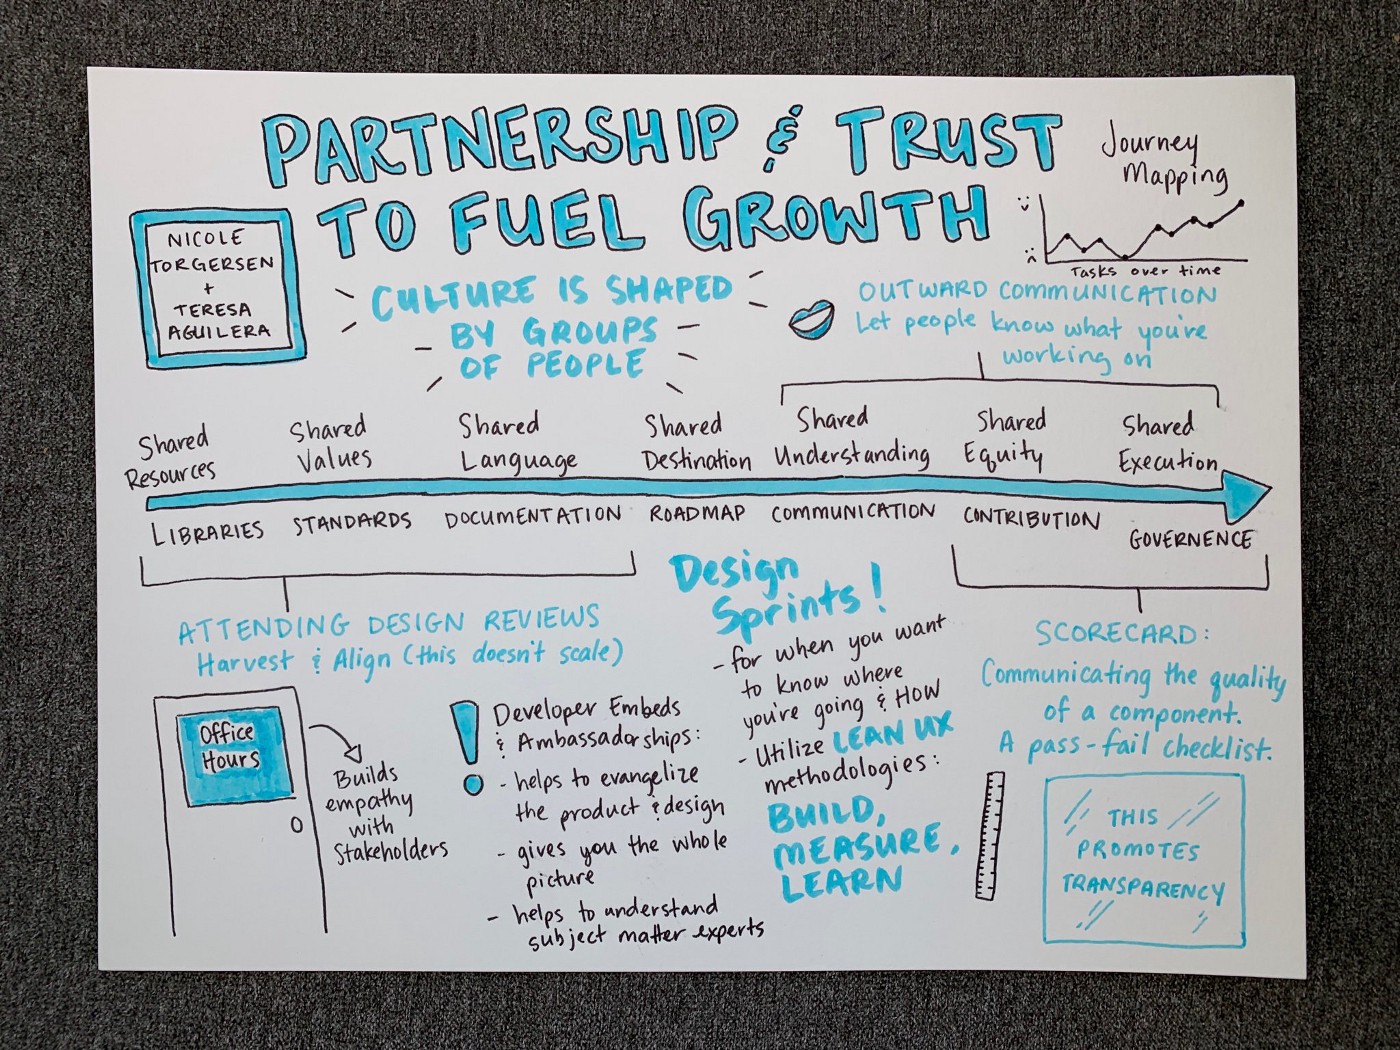 A page of drawings and handwritten notes titled, "Partnership & Trust to Fuel Growth"